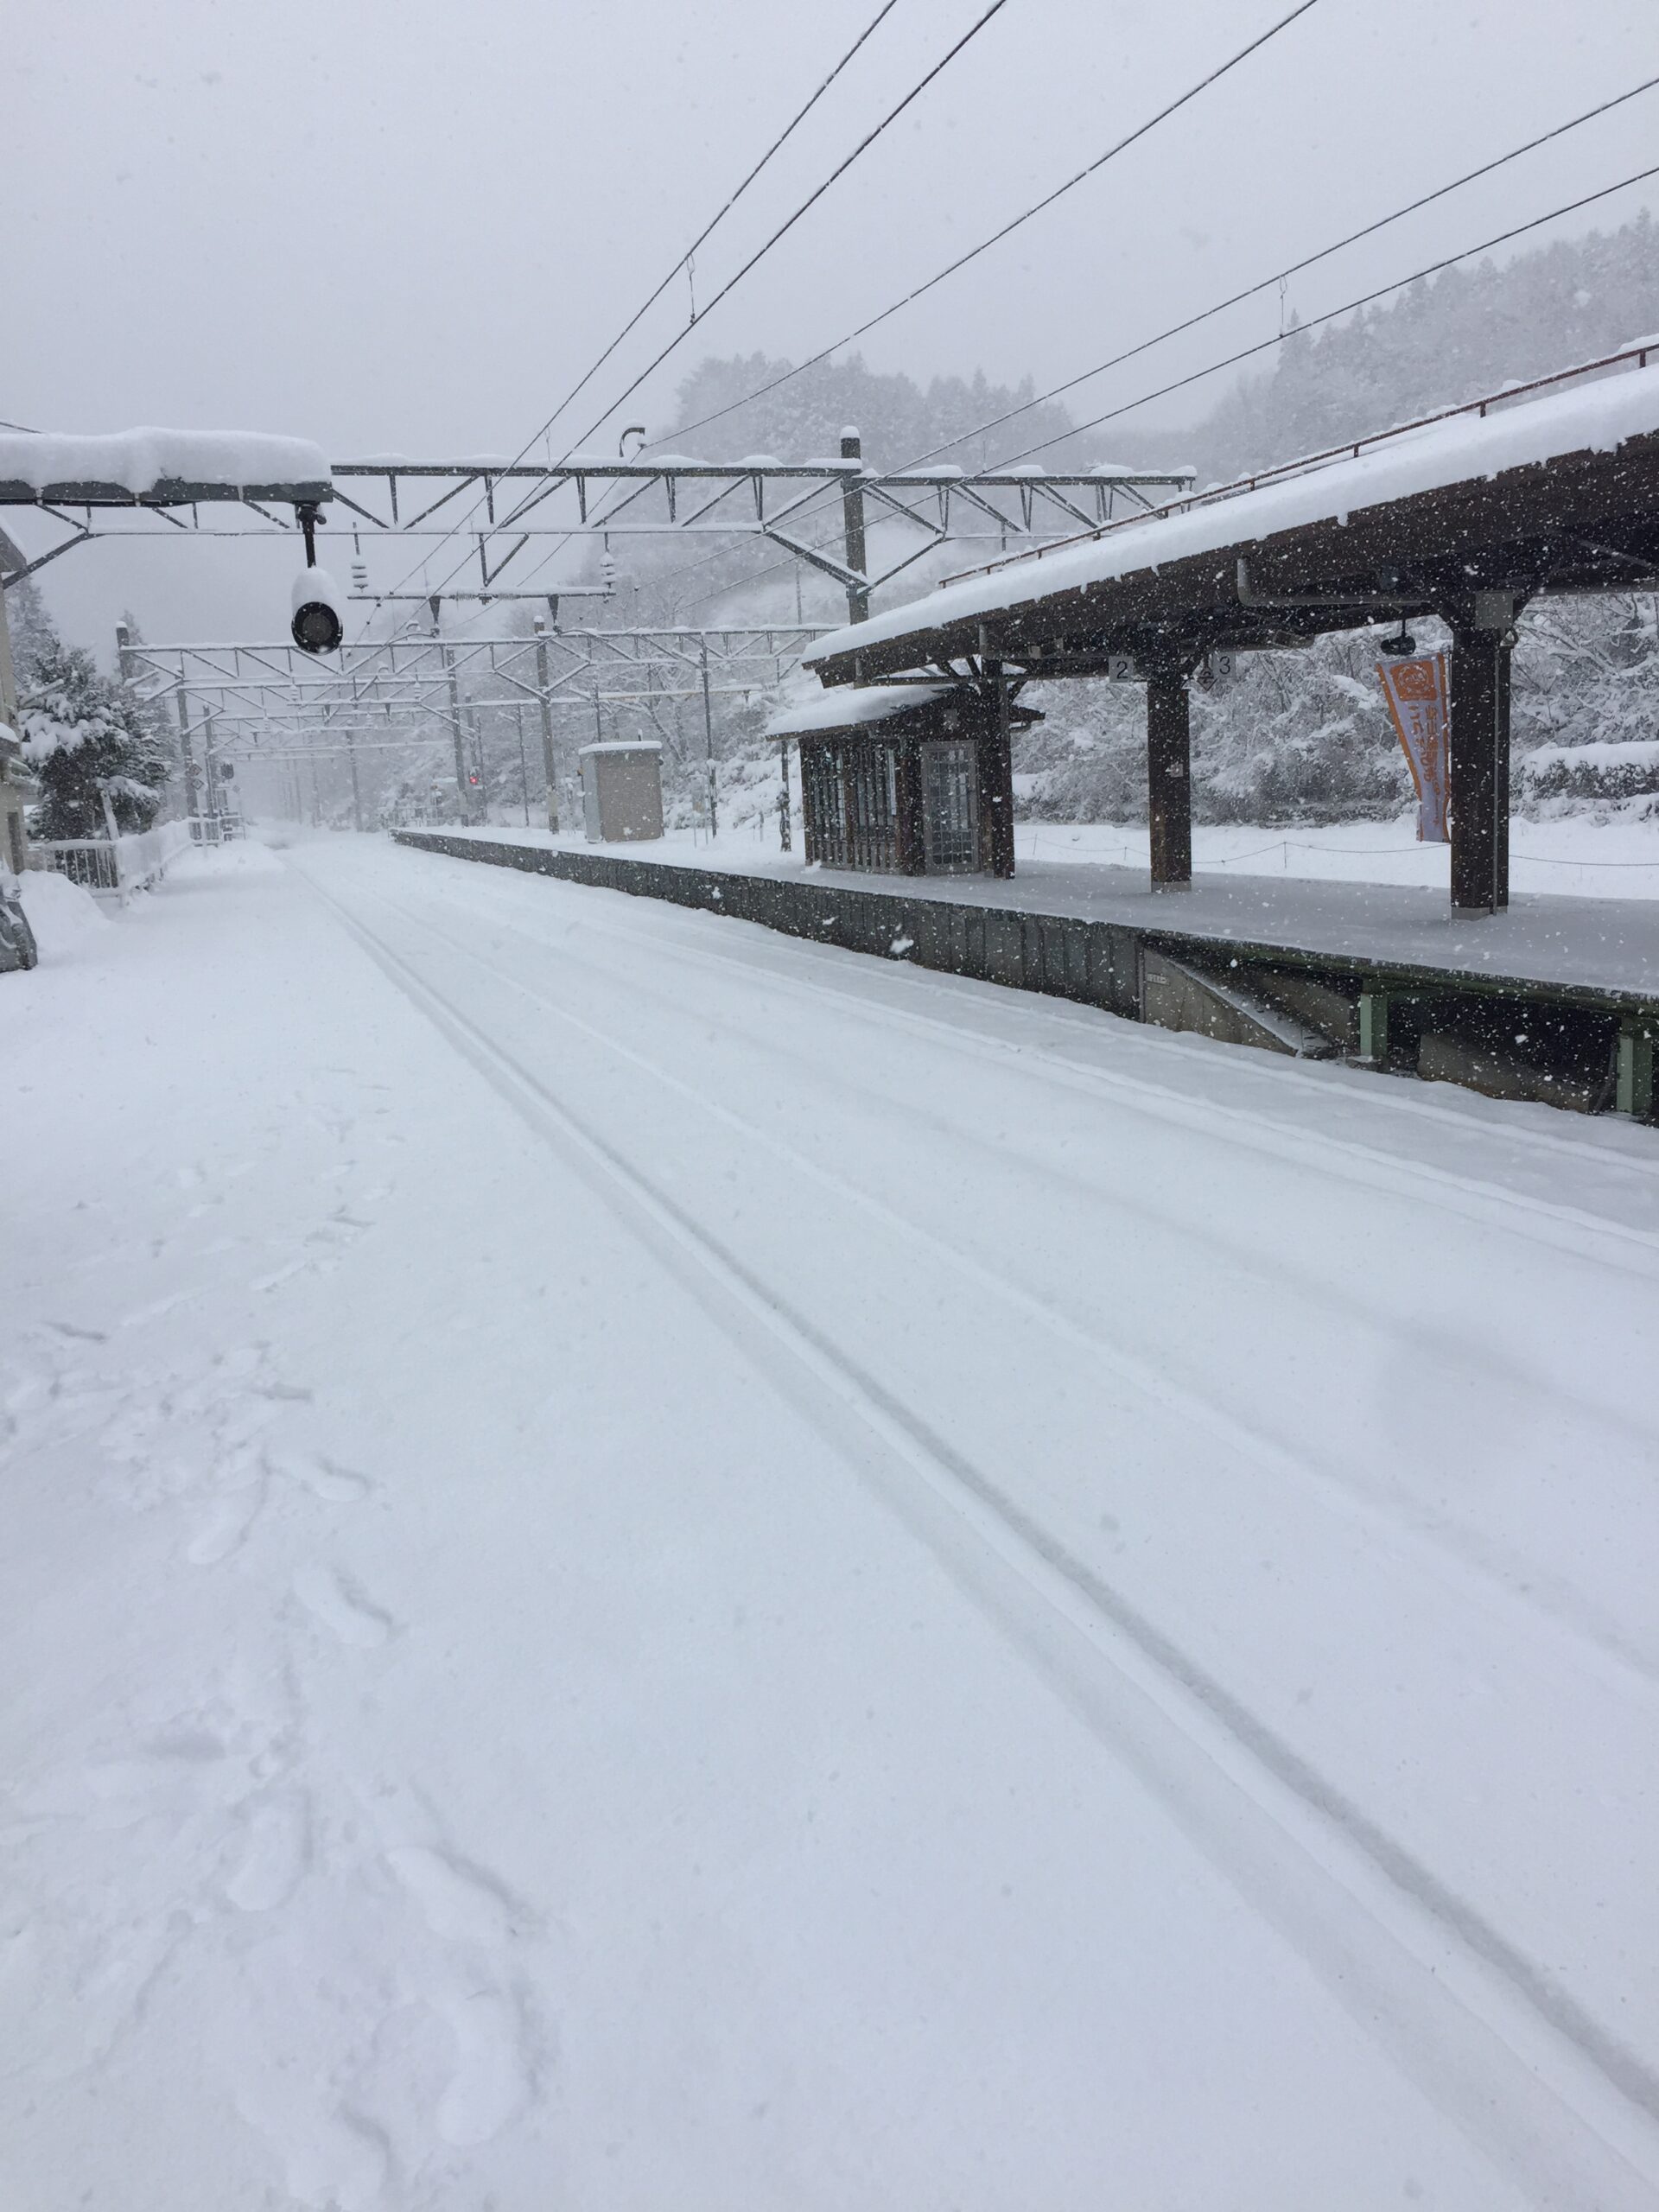 Station in heavy snow